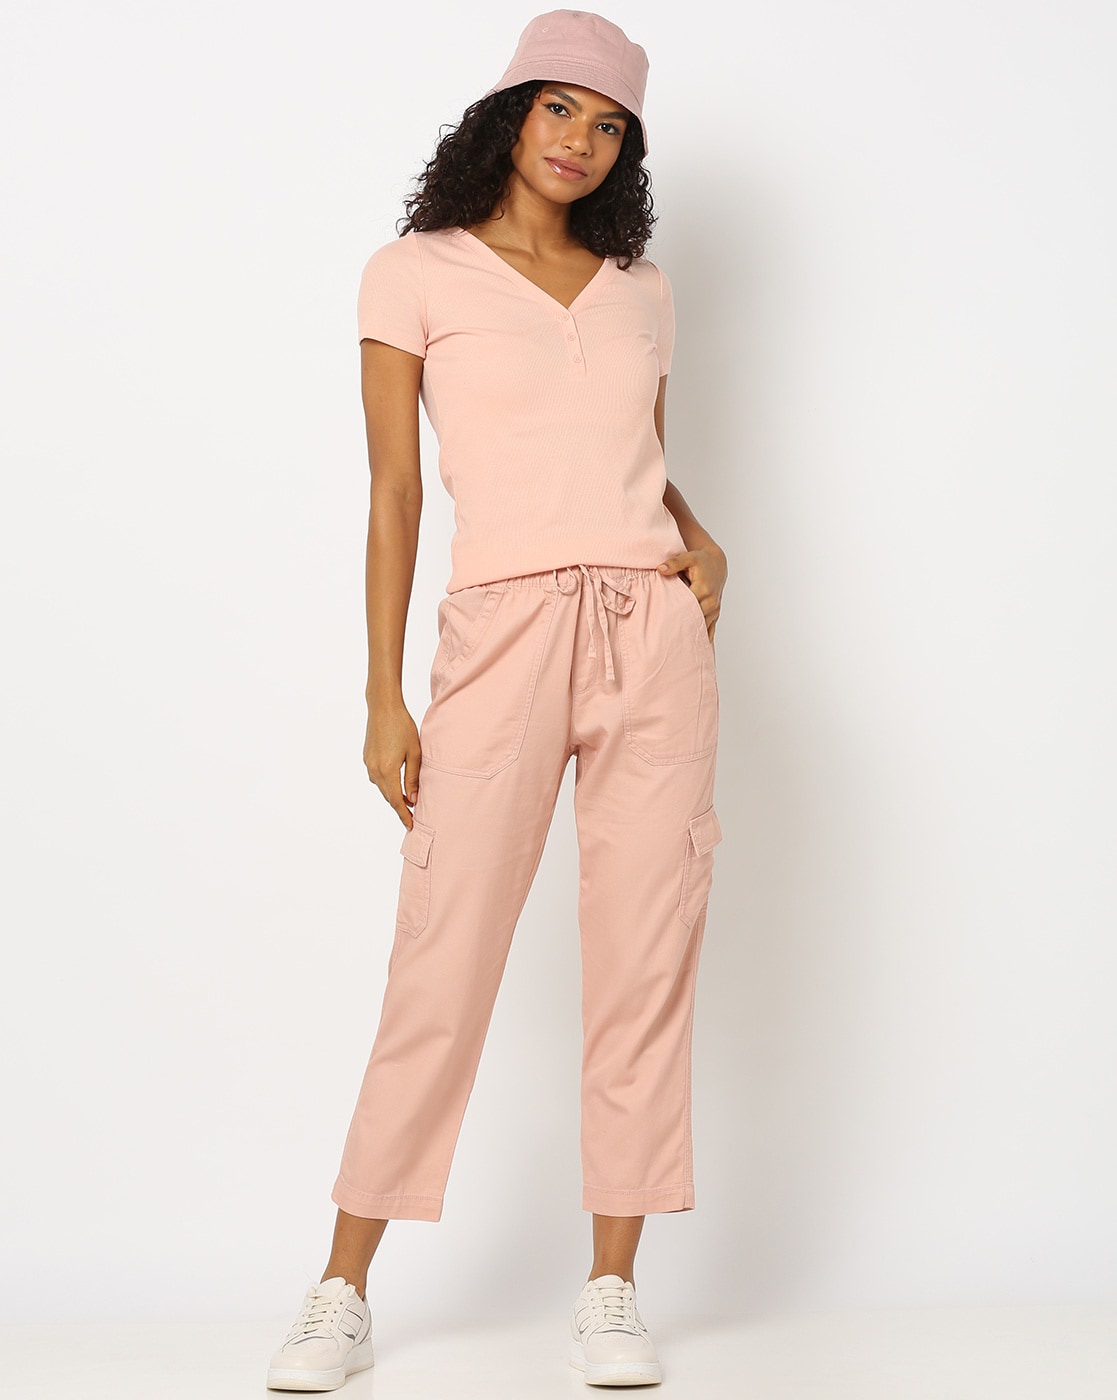 Buy Gap Cargo Trousers from the Gap online shop